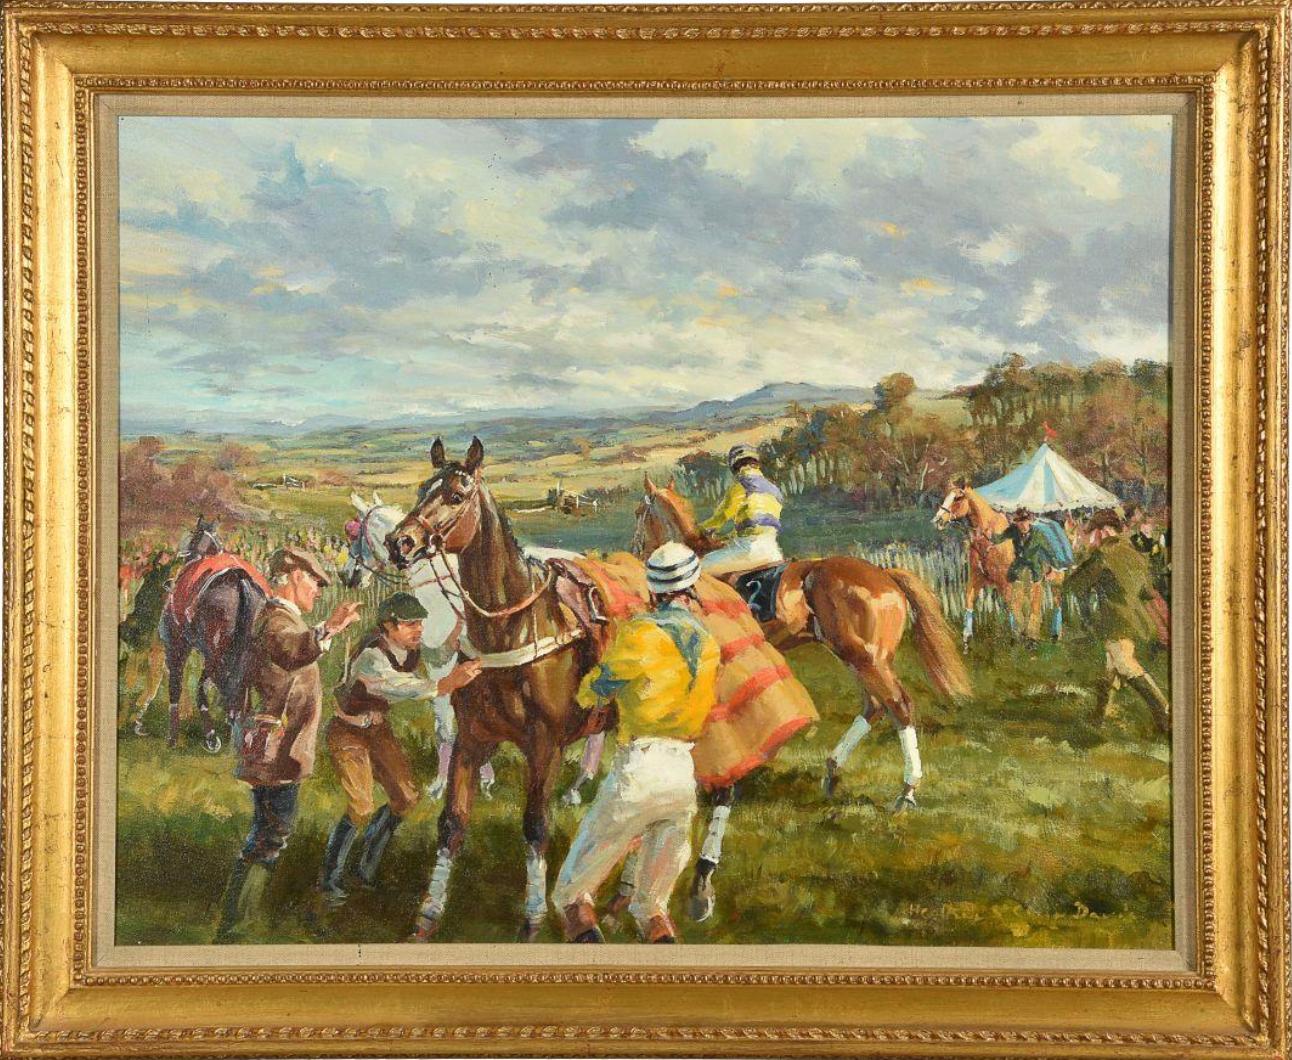 Heather St. Clair Davis Landscape Painting - Horse racing - "Stand, dammit!"